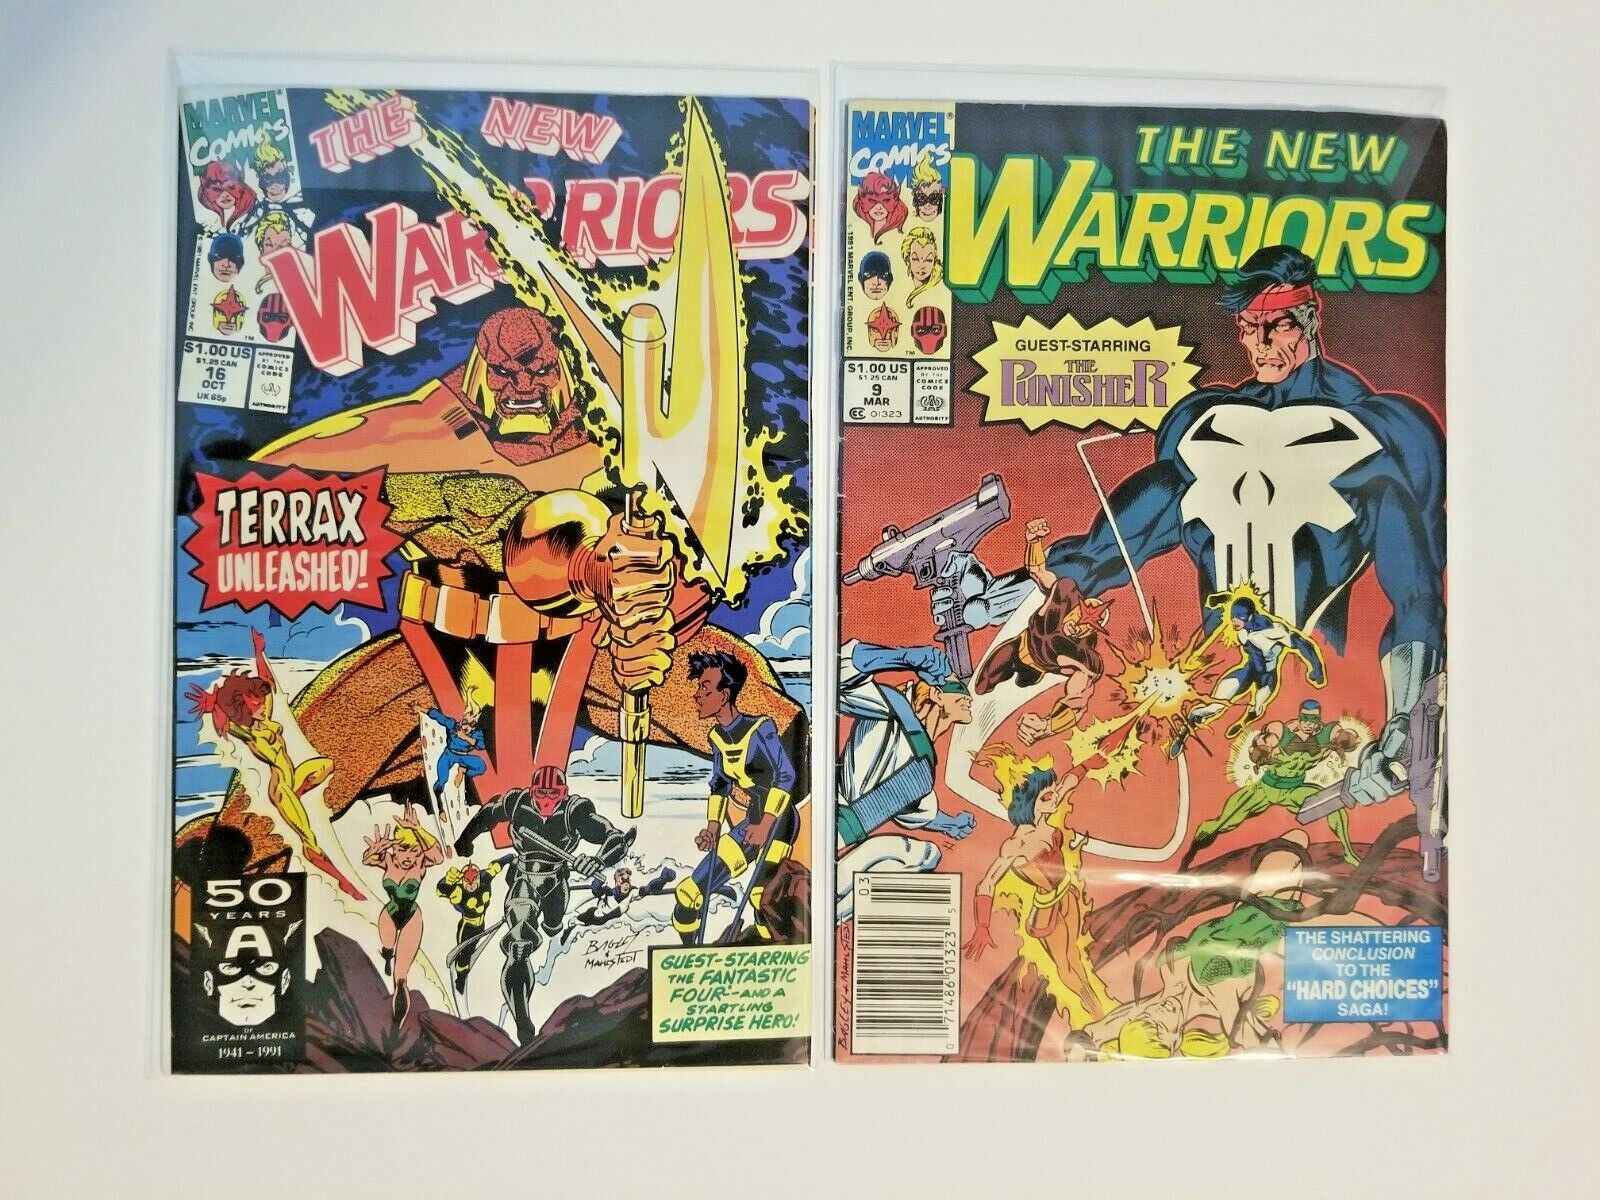 The New Warriors #9 ft. The Punisher and #16 ft. The Fantastic Four LOT OF 2